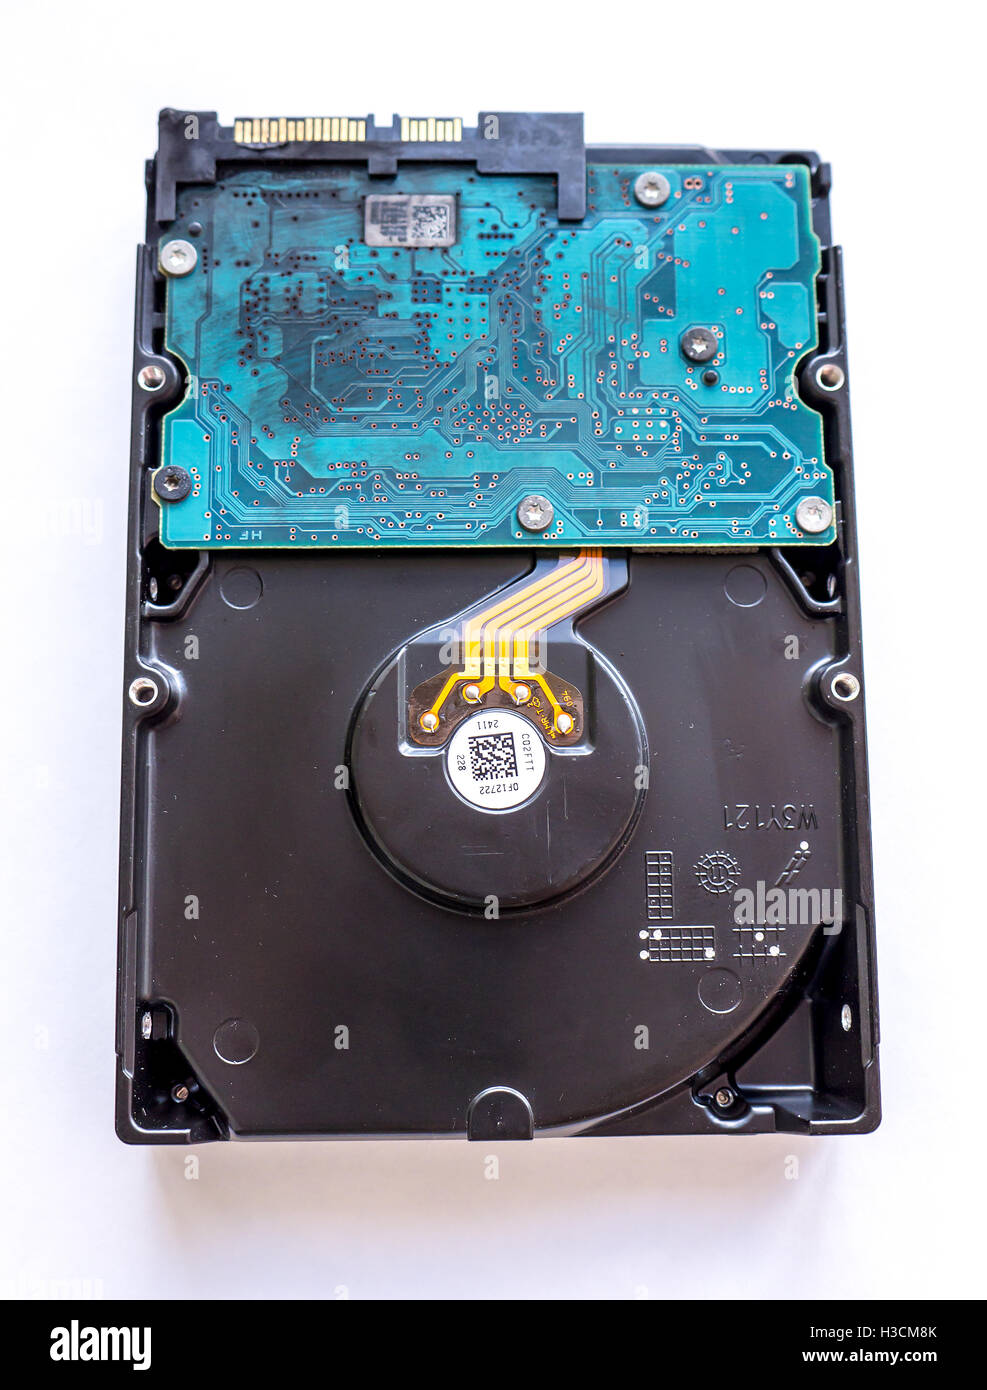 2TB HDD Toshiba DT01ABA200V. Toshiba Corporation is a Japanese multinational conglomerate corporation headquartered in Japan. Stock Photo